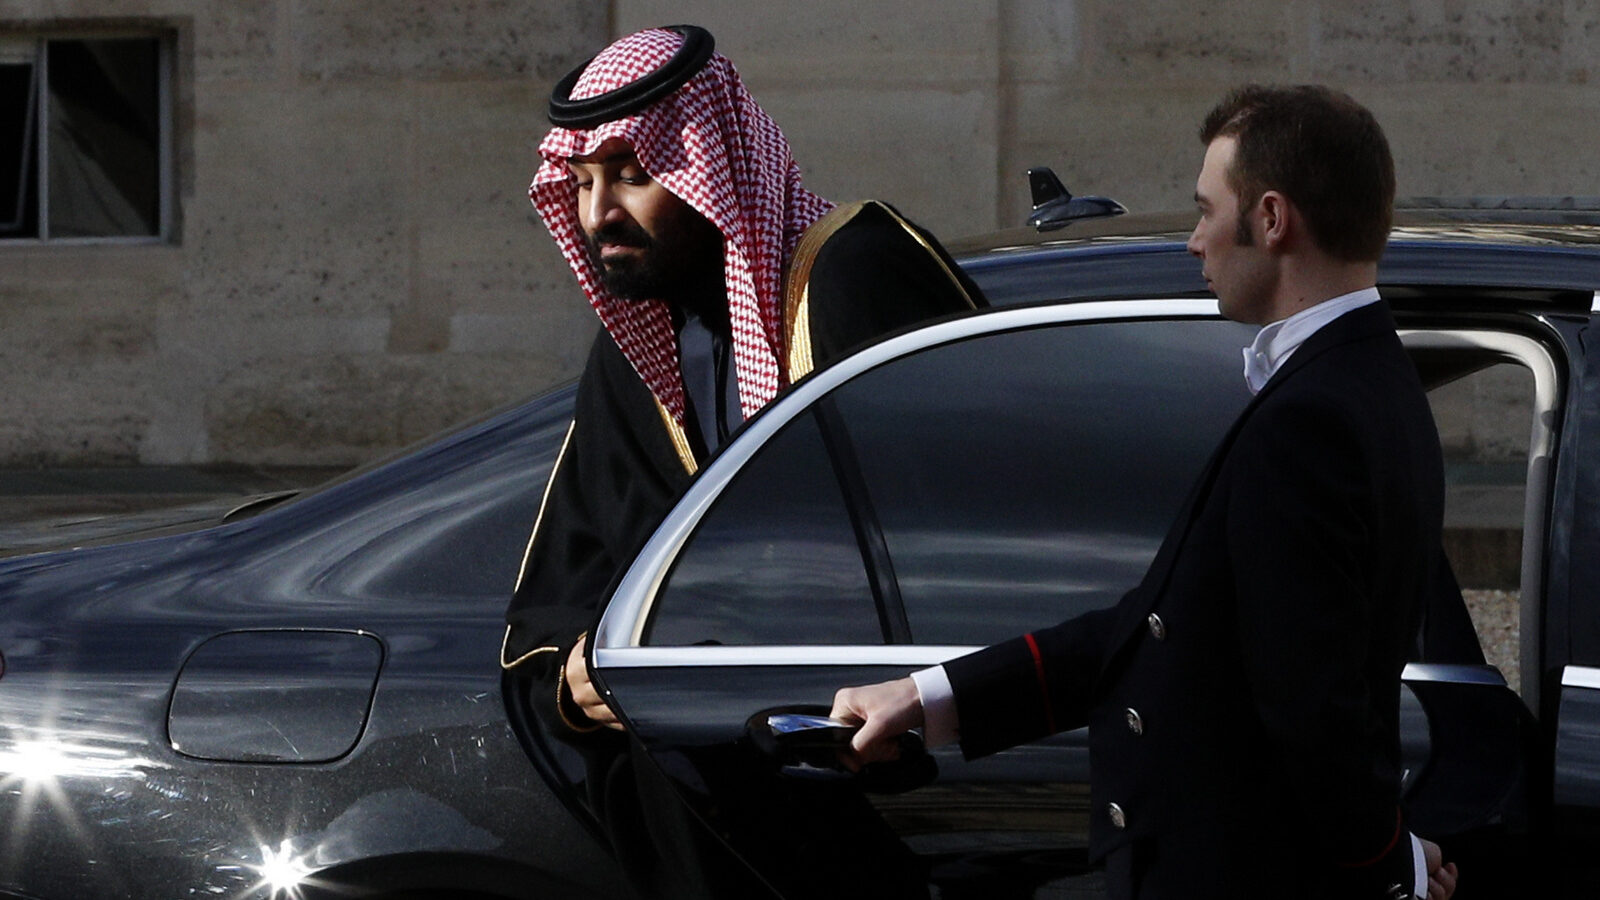 Saudi Arabia Crown Prince Mohammed bin Salman arrives for a meeting with French President Emmanuel Macron at the Elysee Palace in Paris, Tuesday, April 10, 2018. Macron meets with Prince Mohammed in Paris to bolster economic ties and strengthen cooperation on security and defense between the two countries. (AP Photo/Christophe Ena)